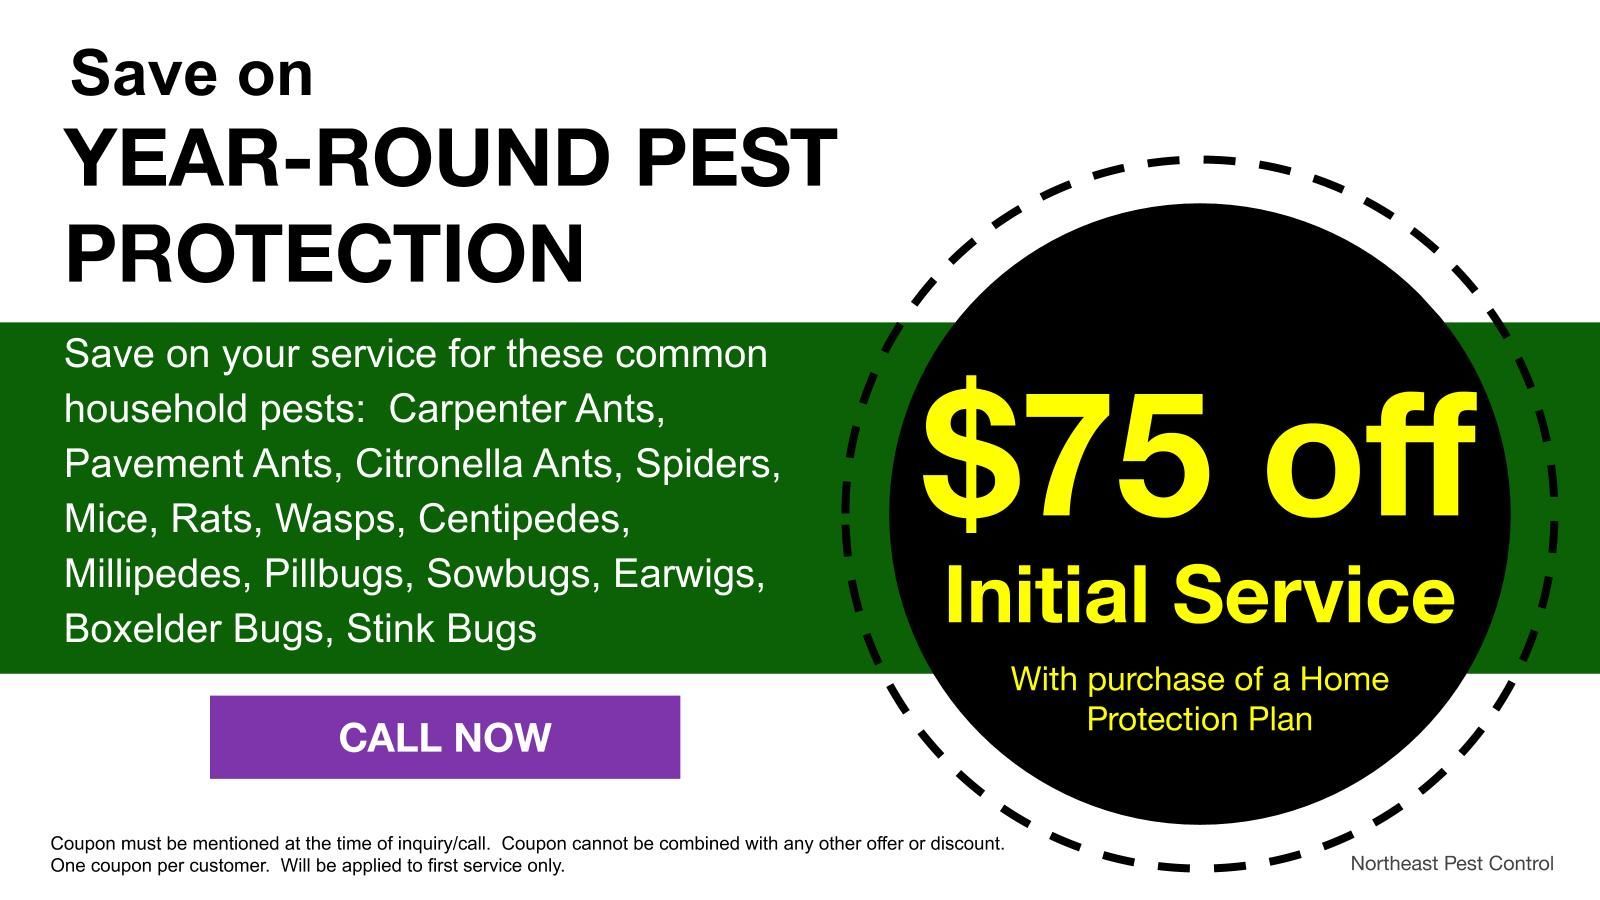 Save on Year-Round Pest Protection